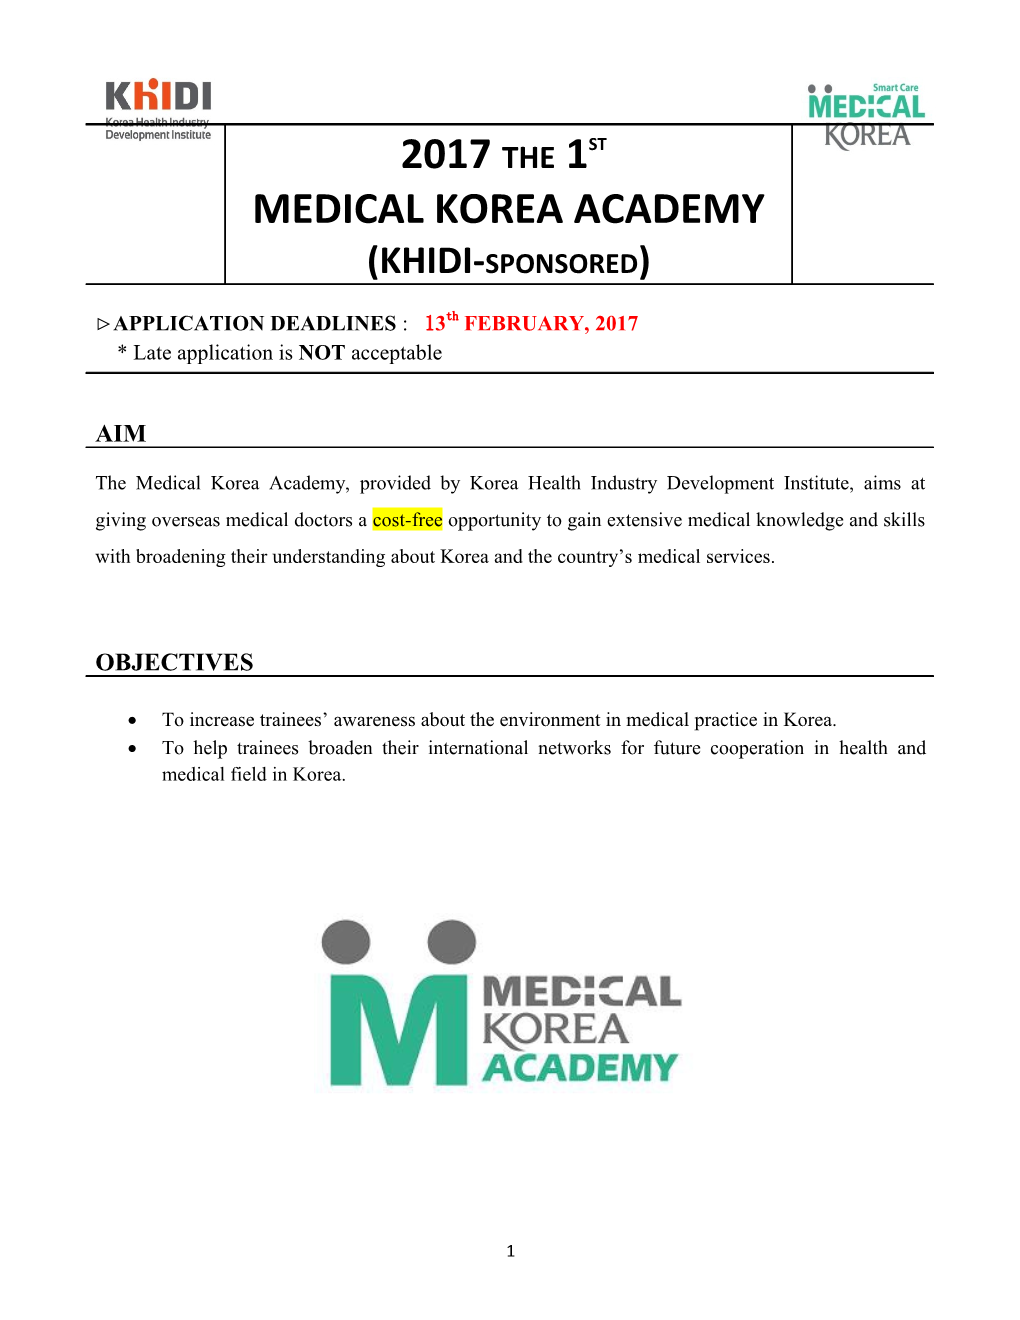 The Medical Korea Academy, Provided by Korea Health Industry Development Institute, Aims